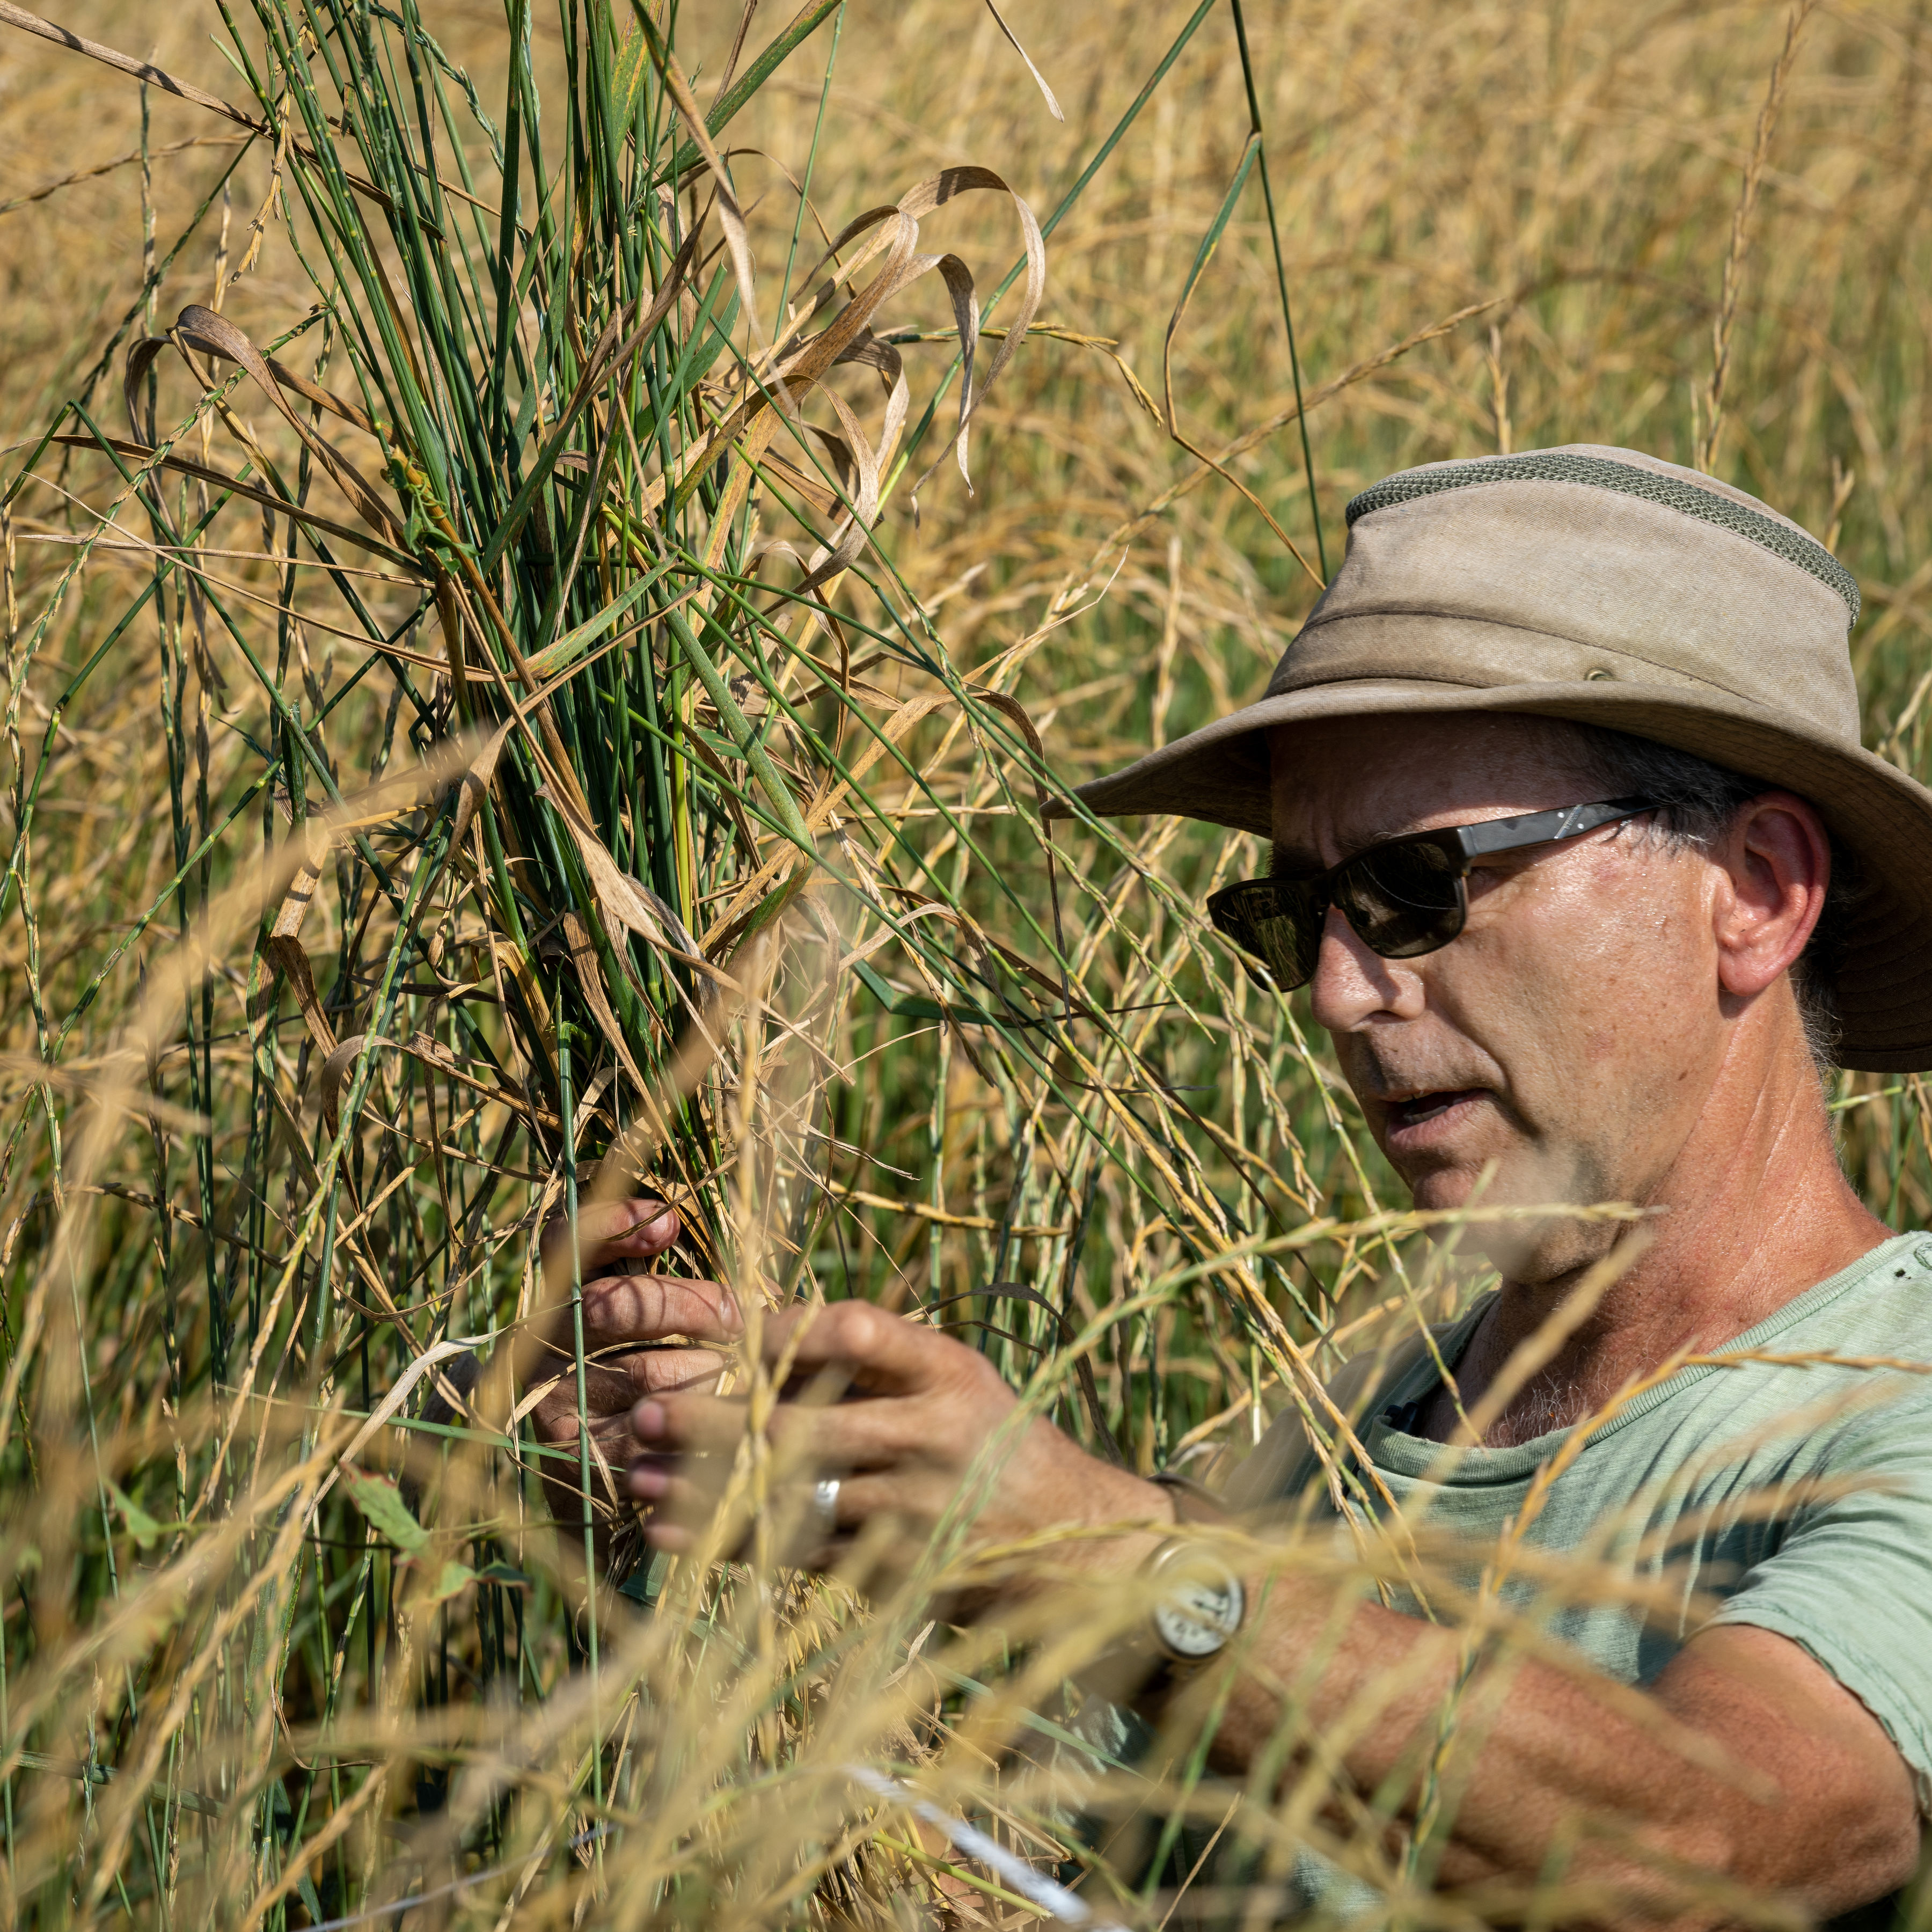 A white man in a shady hat and sunglasses holds up a stalk of wheatgrass in a grassy field.